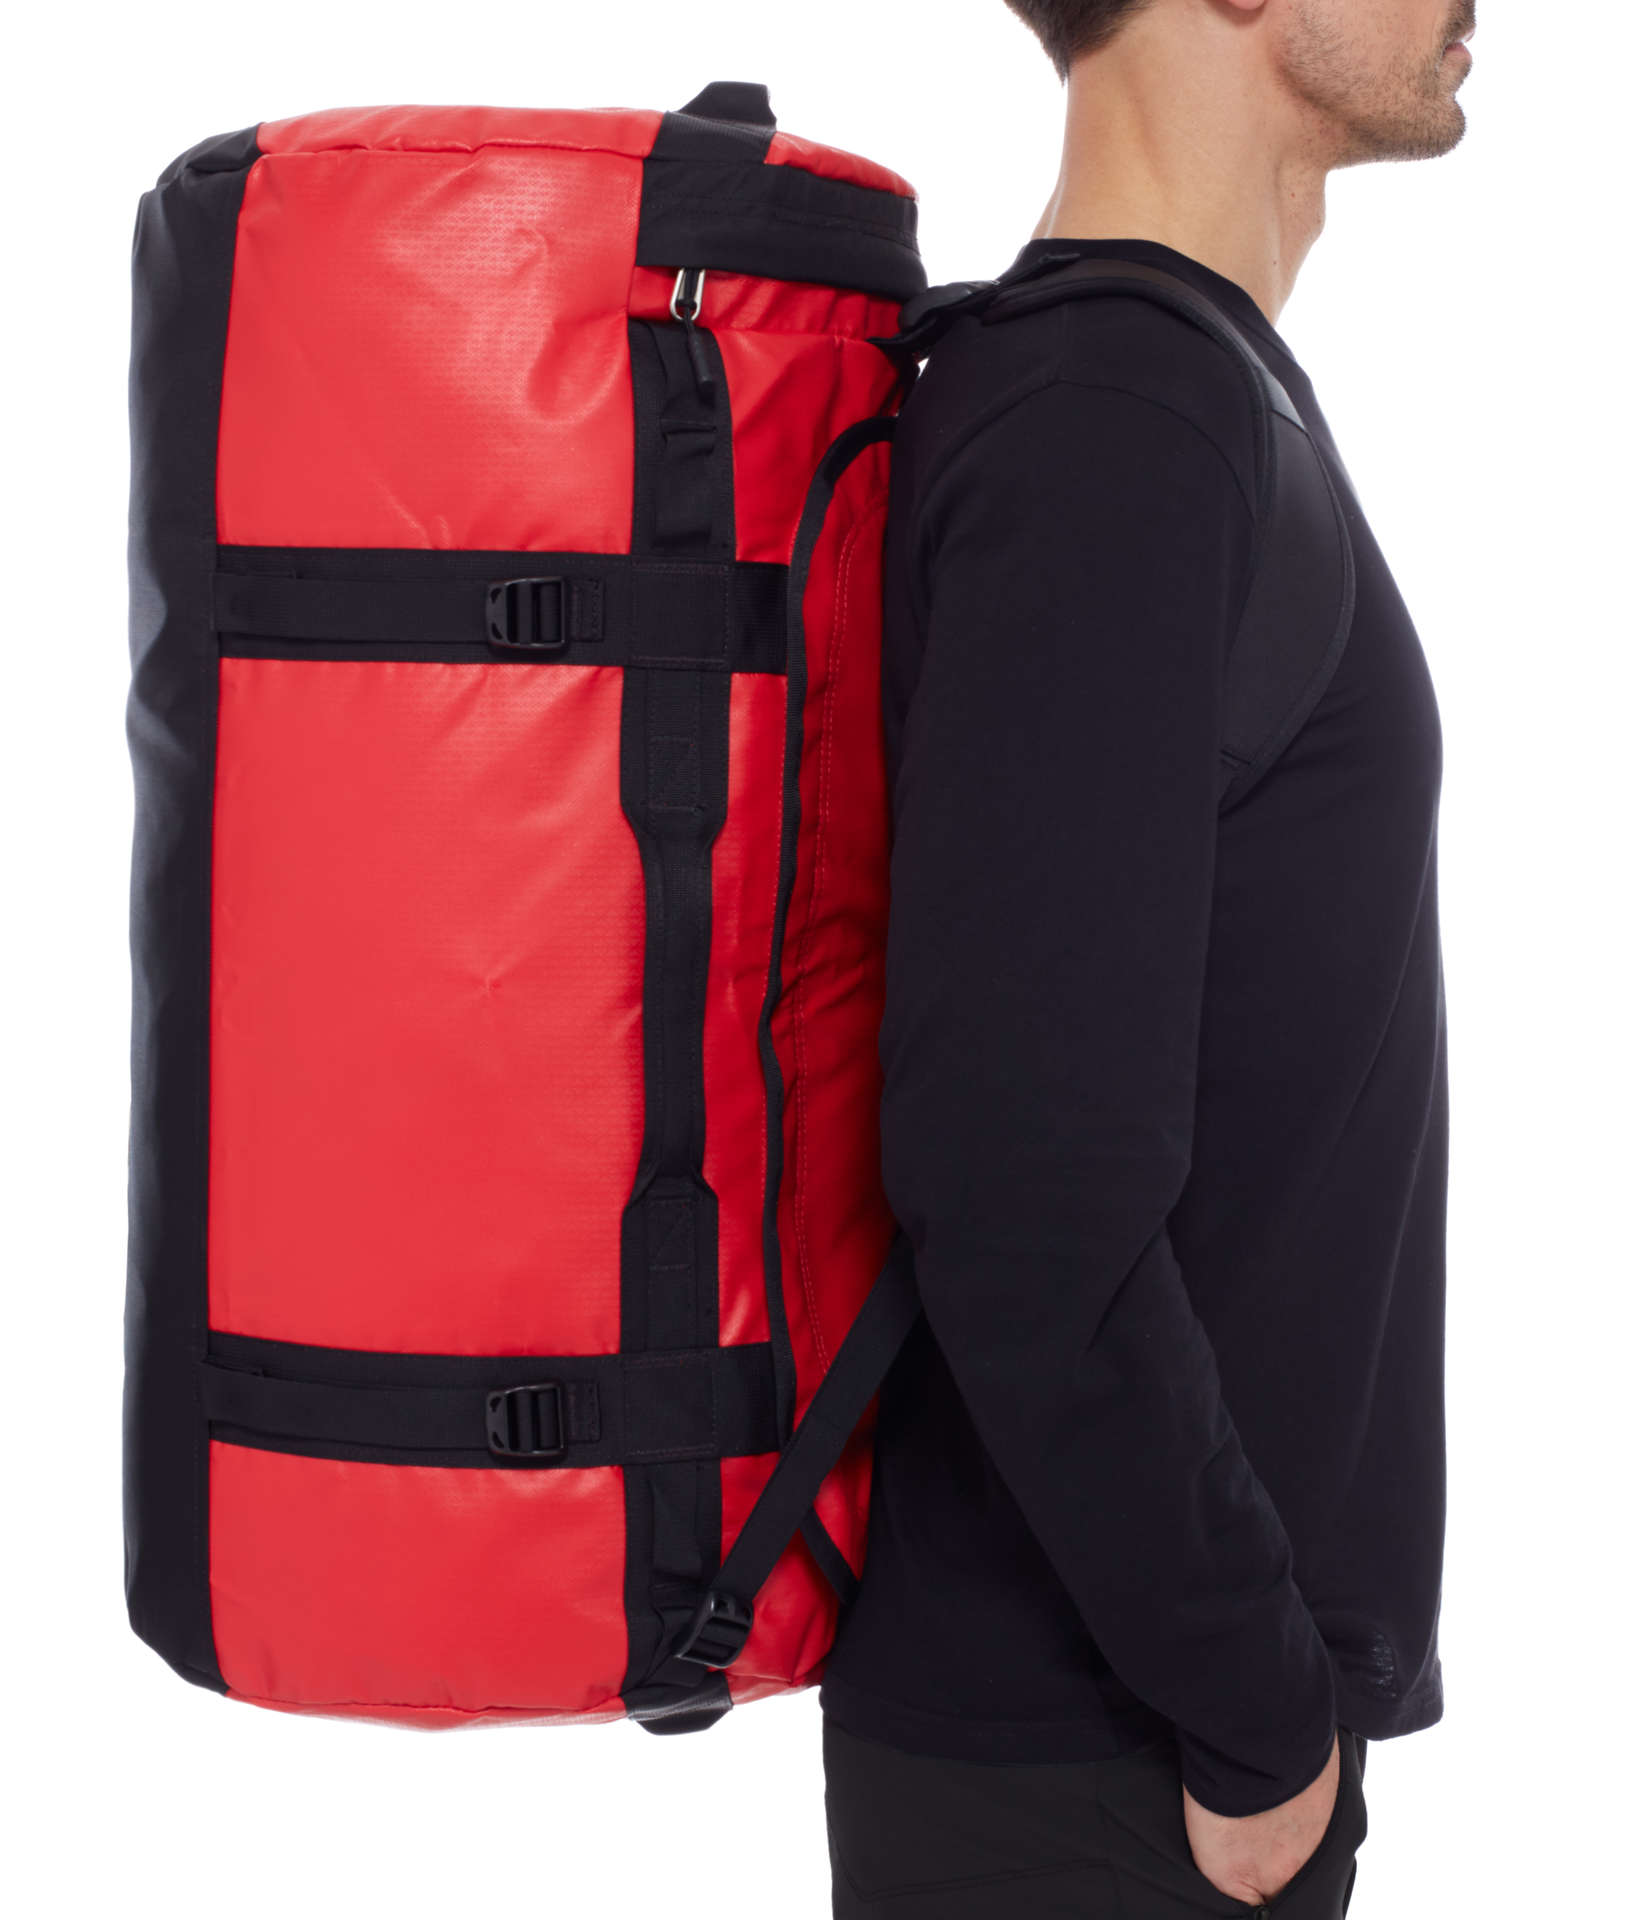 The North Face Base Camp Duffel Rood/Zwart